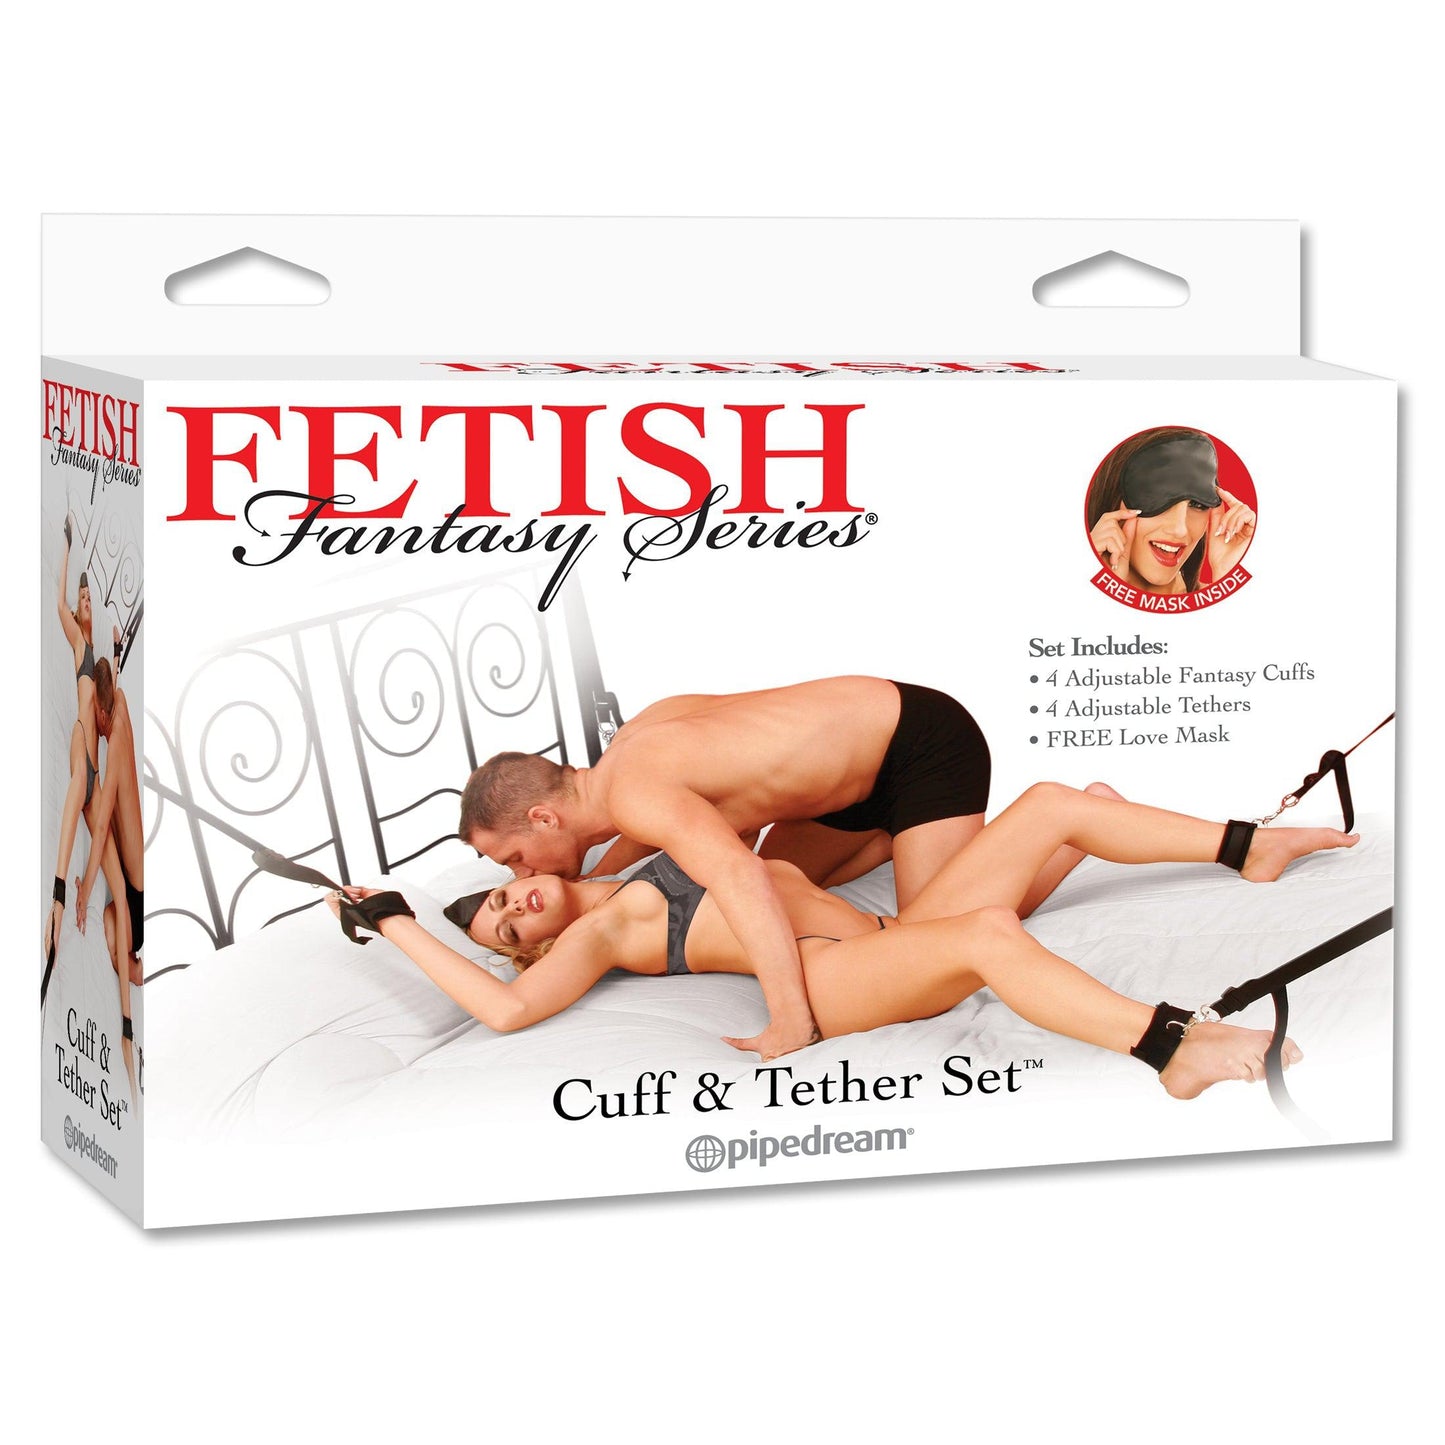 Fetish Fantasy Series Cuff and Tether Set